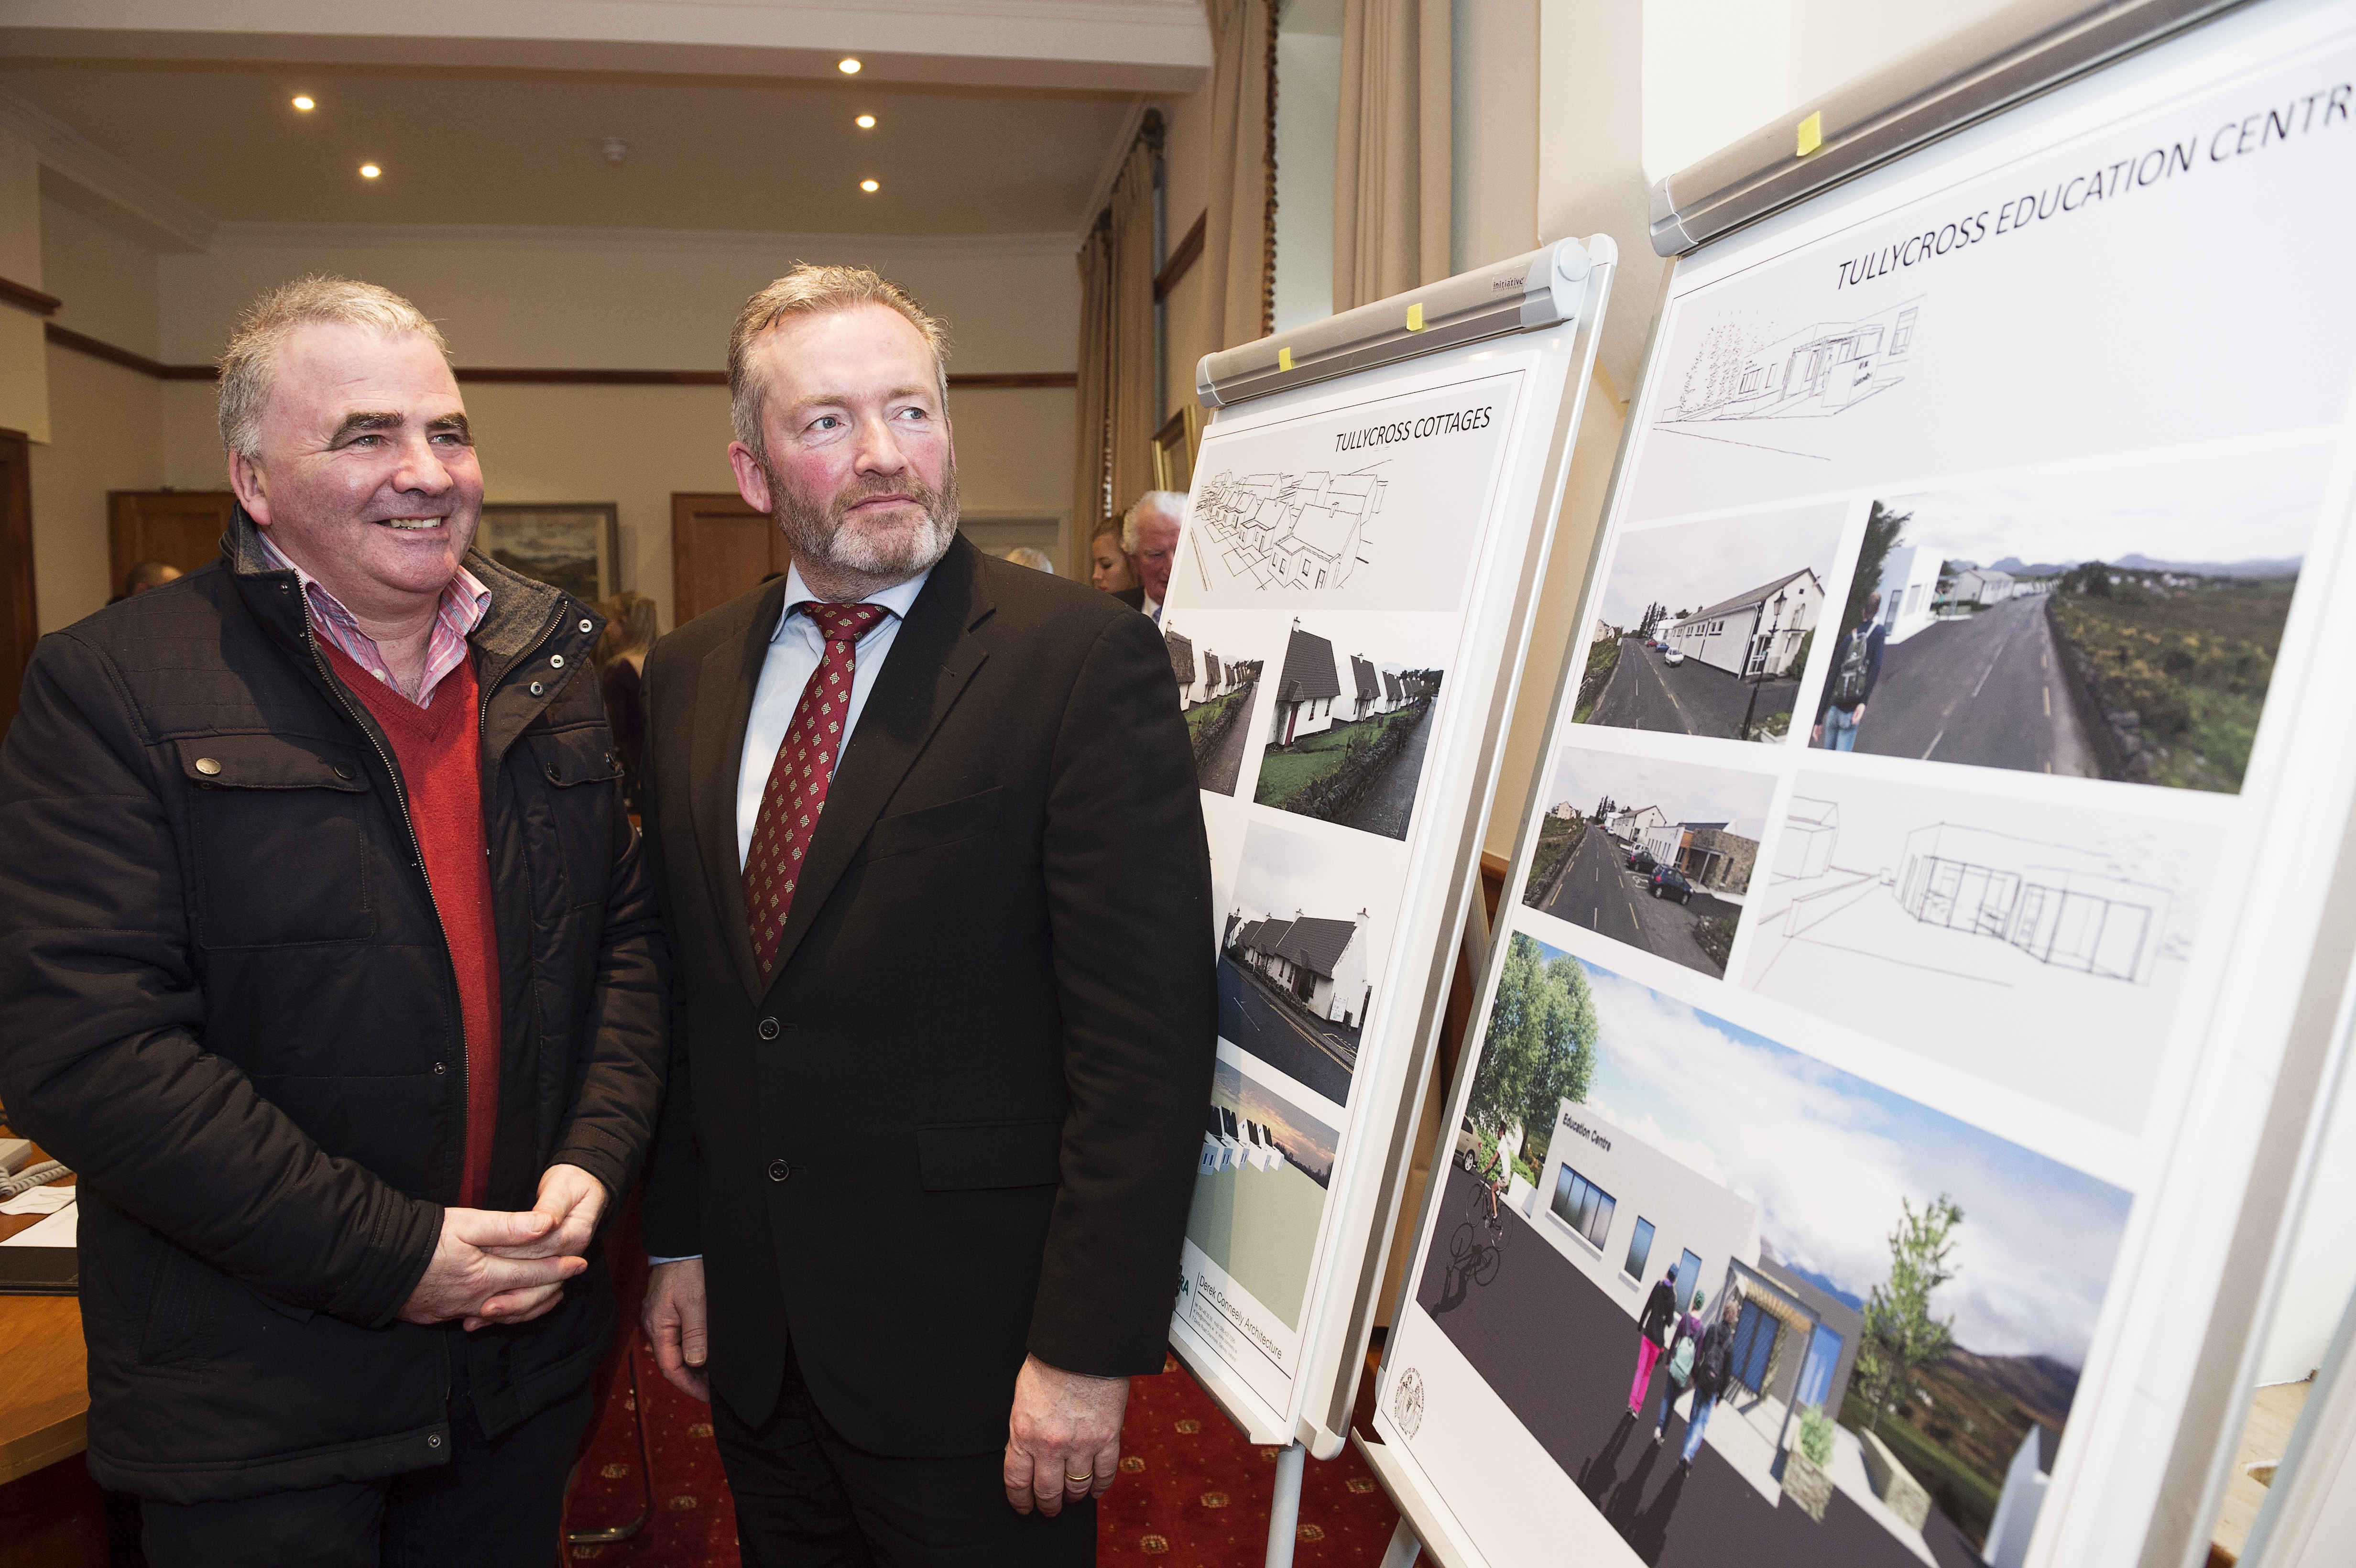 Cllr Tomas Welby and Dr Kevin Heanue, Chairman of Connemara West at the launch of Connemara West’s ambitious International Residential Education Centre at a briefing in the Hotel Meyrick, Galway.